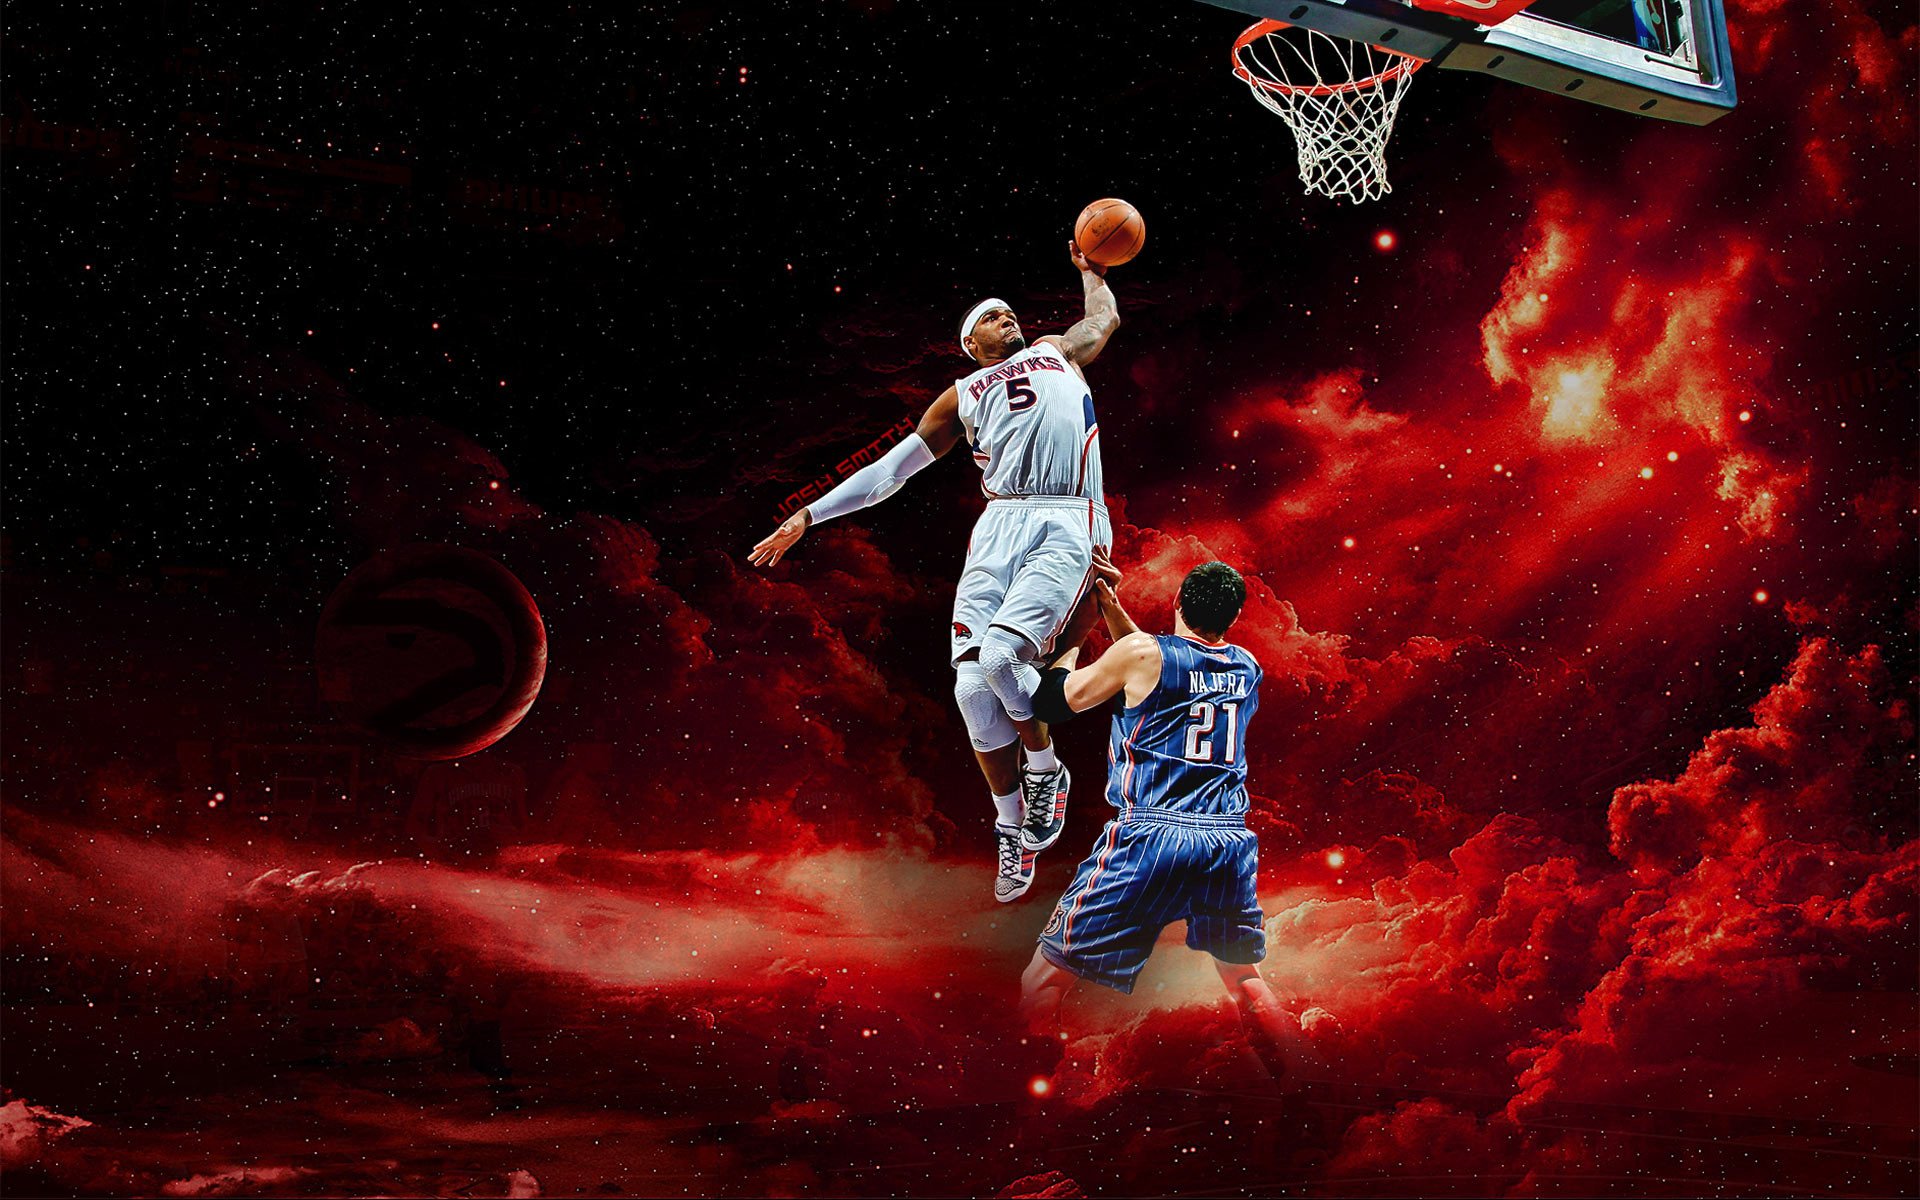 1438096-free-download-nba-wallpapers-hd-1920x1200-for-1080p.jpg